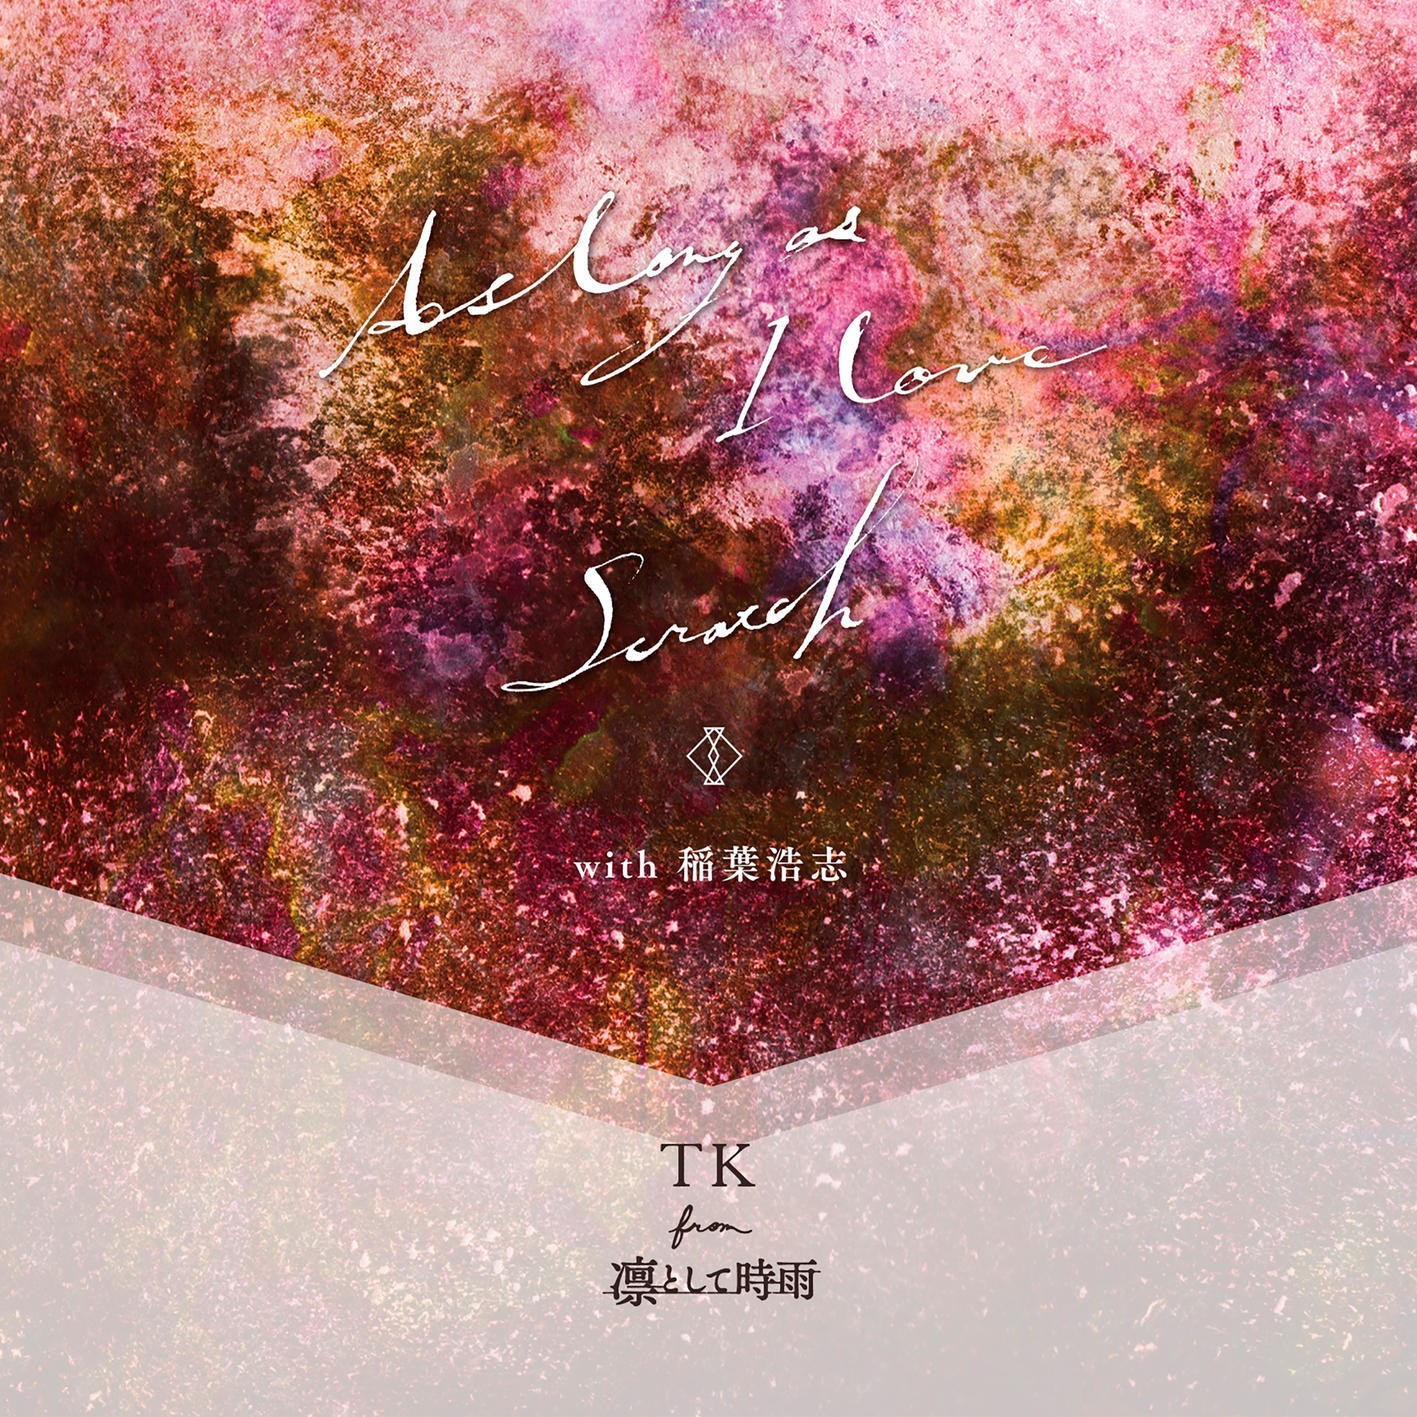 TK from 凛として時雨 – As long as I love / Scratch (with 稲葉浩志) [FLAC / 24bit Lossless / WEB] [2022.03.16]